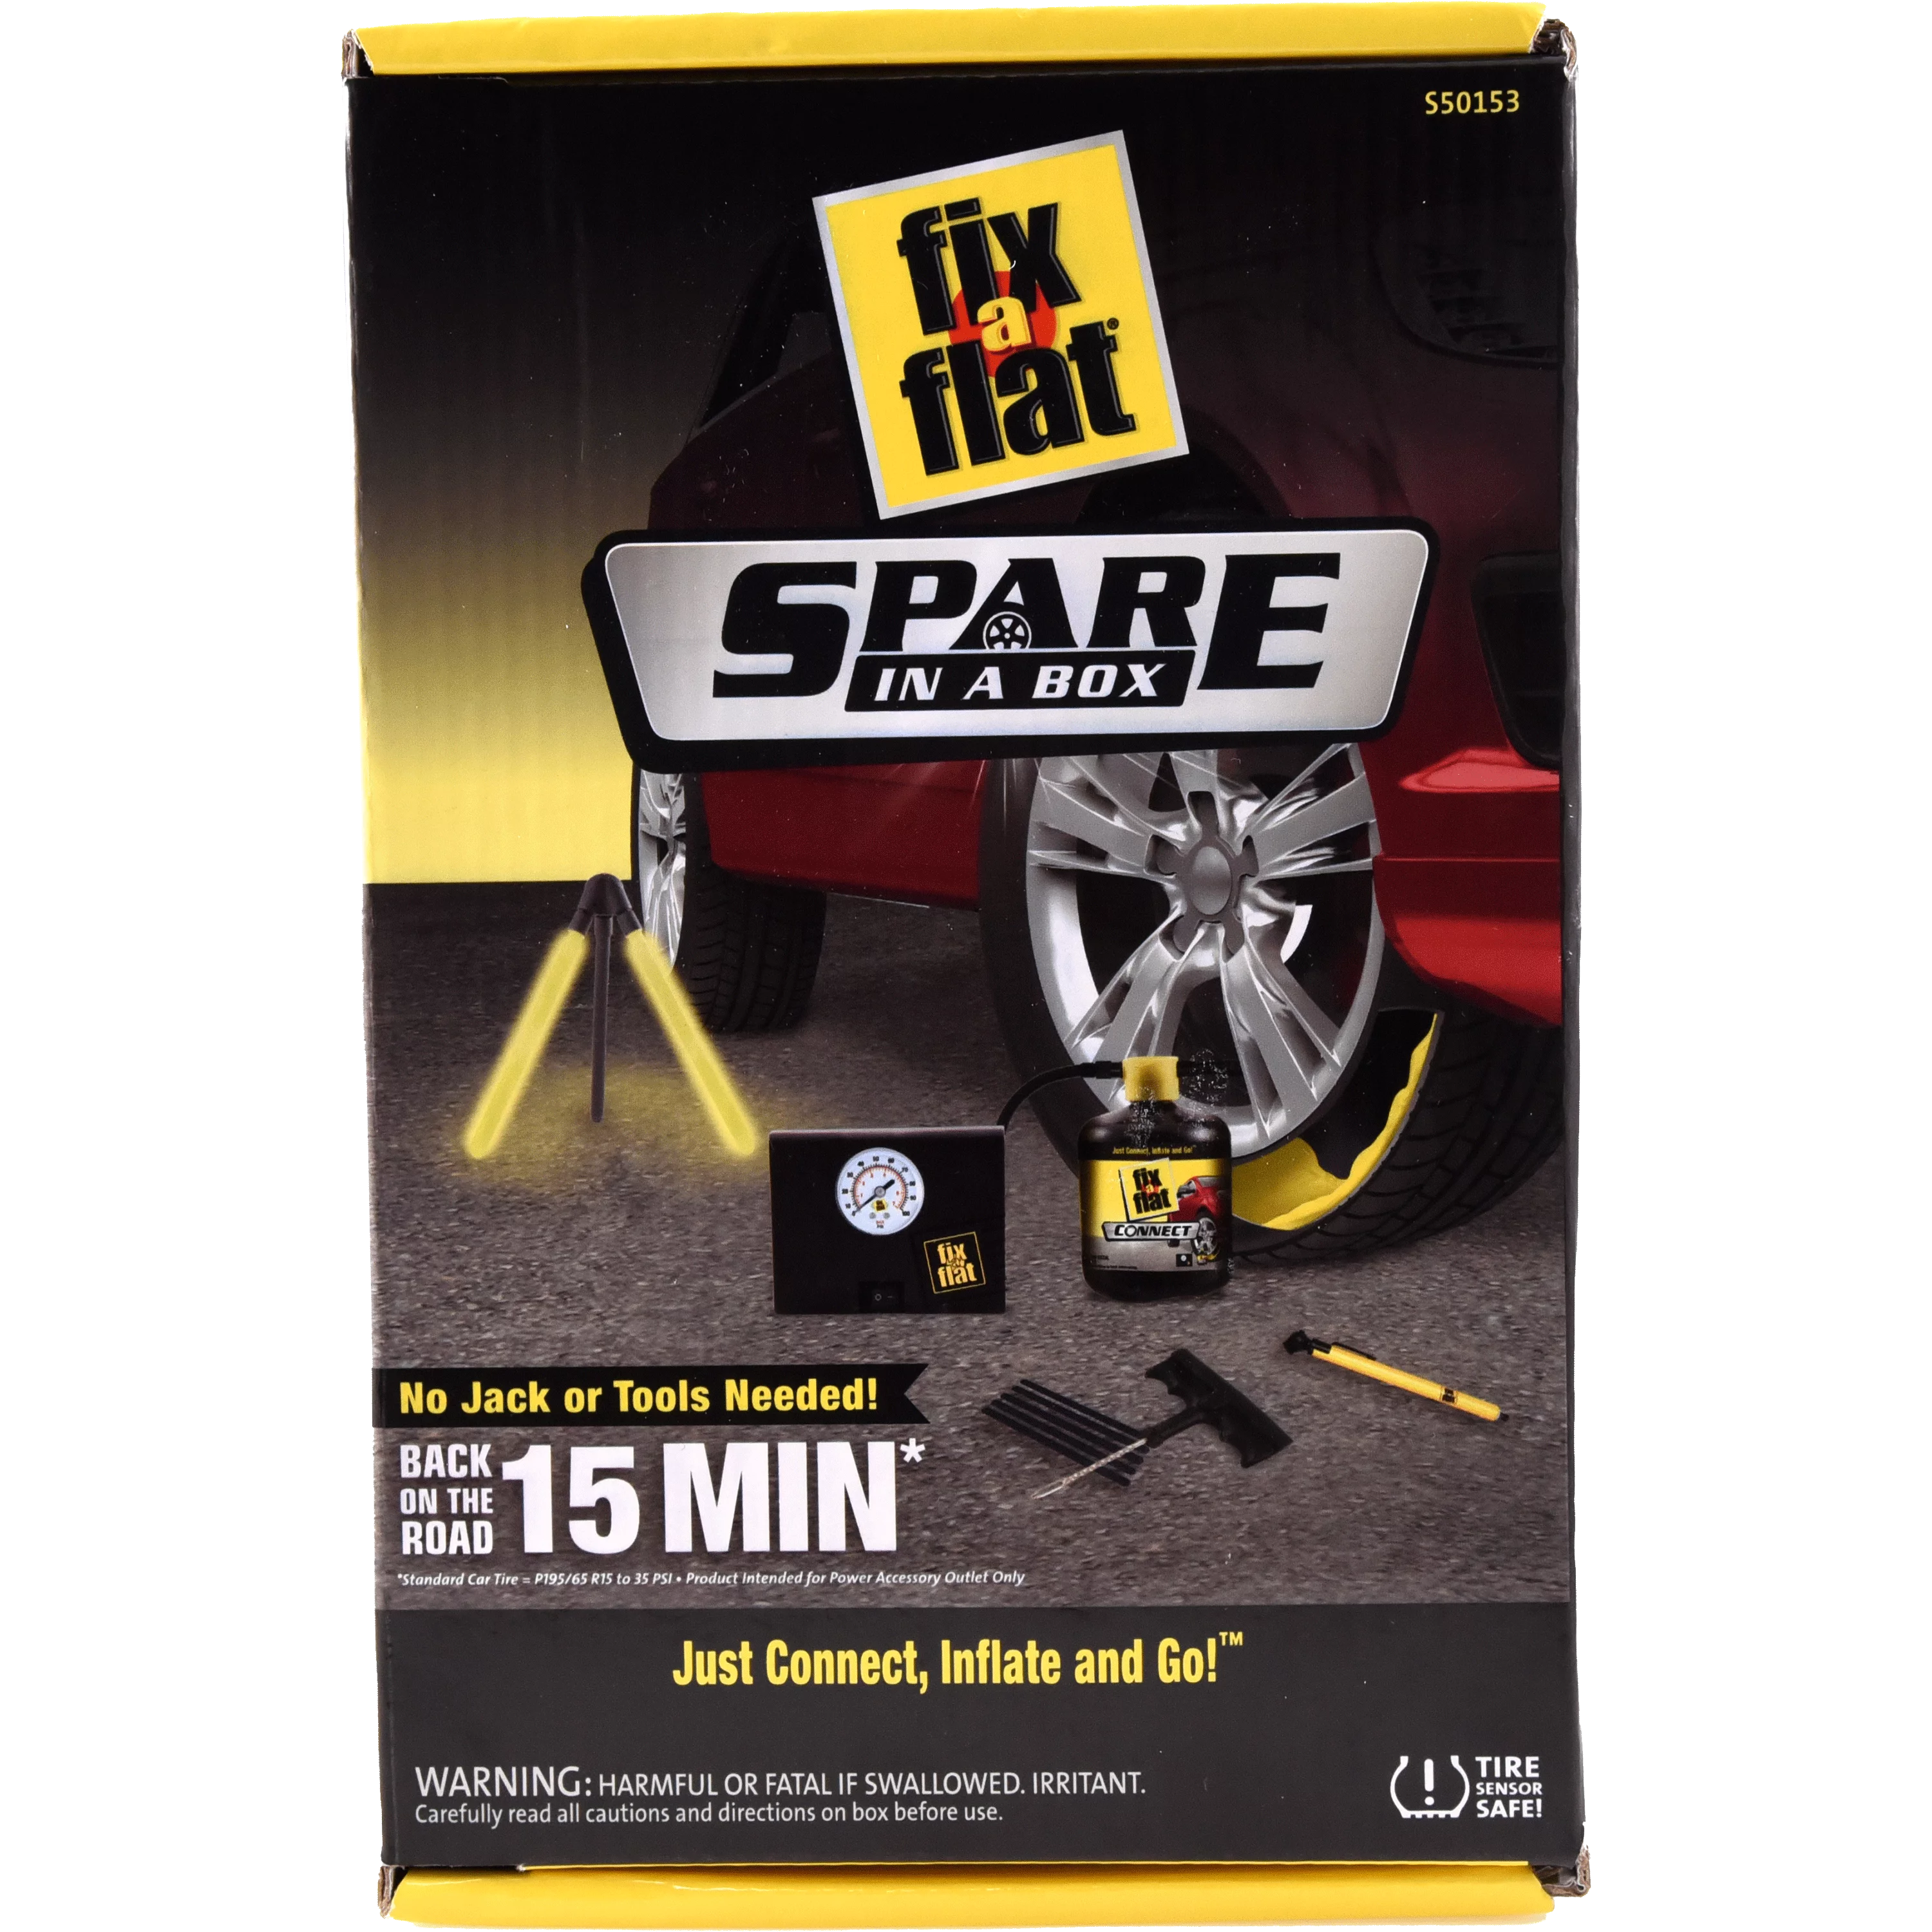 Fix-a-Flat Spare in Box Tire Repair Kit – A Sure Foundation